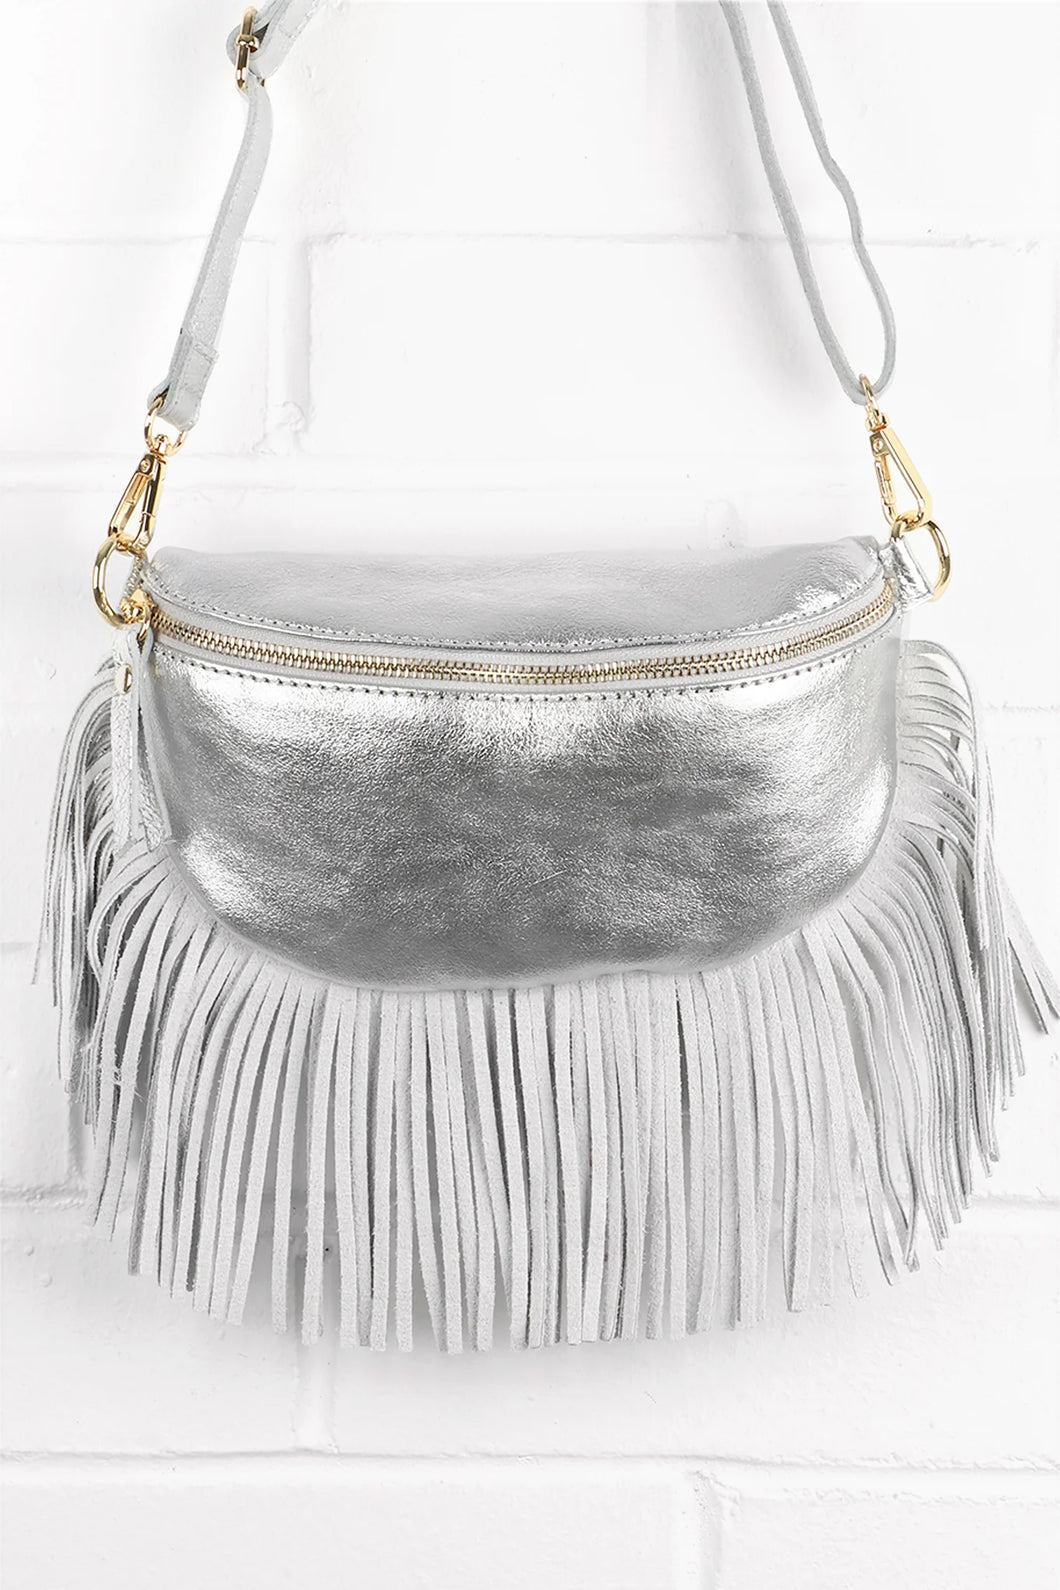 Metallic Silver Leather Bag with Fringe Detail